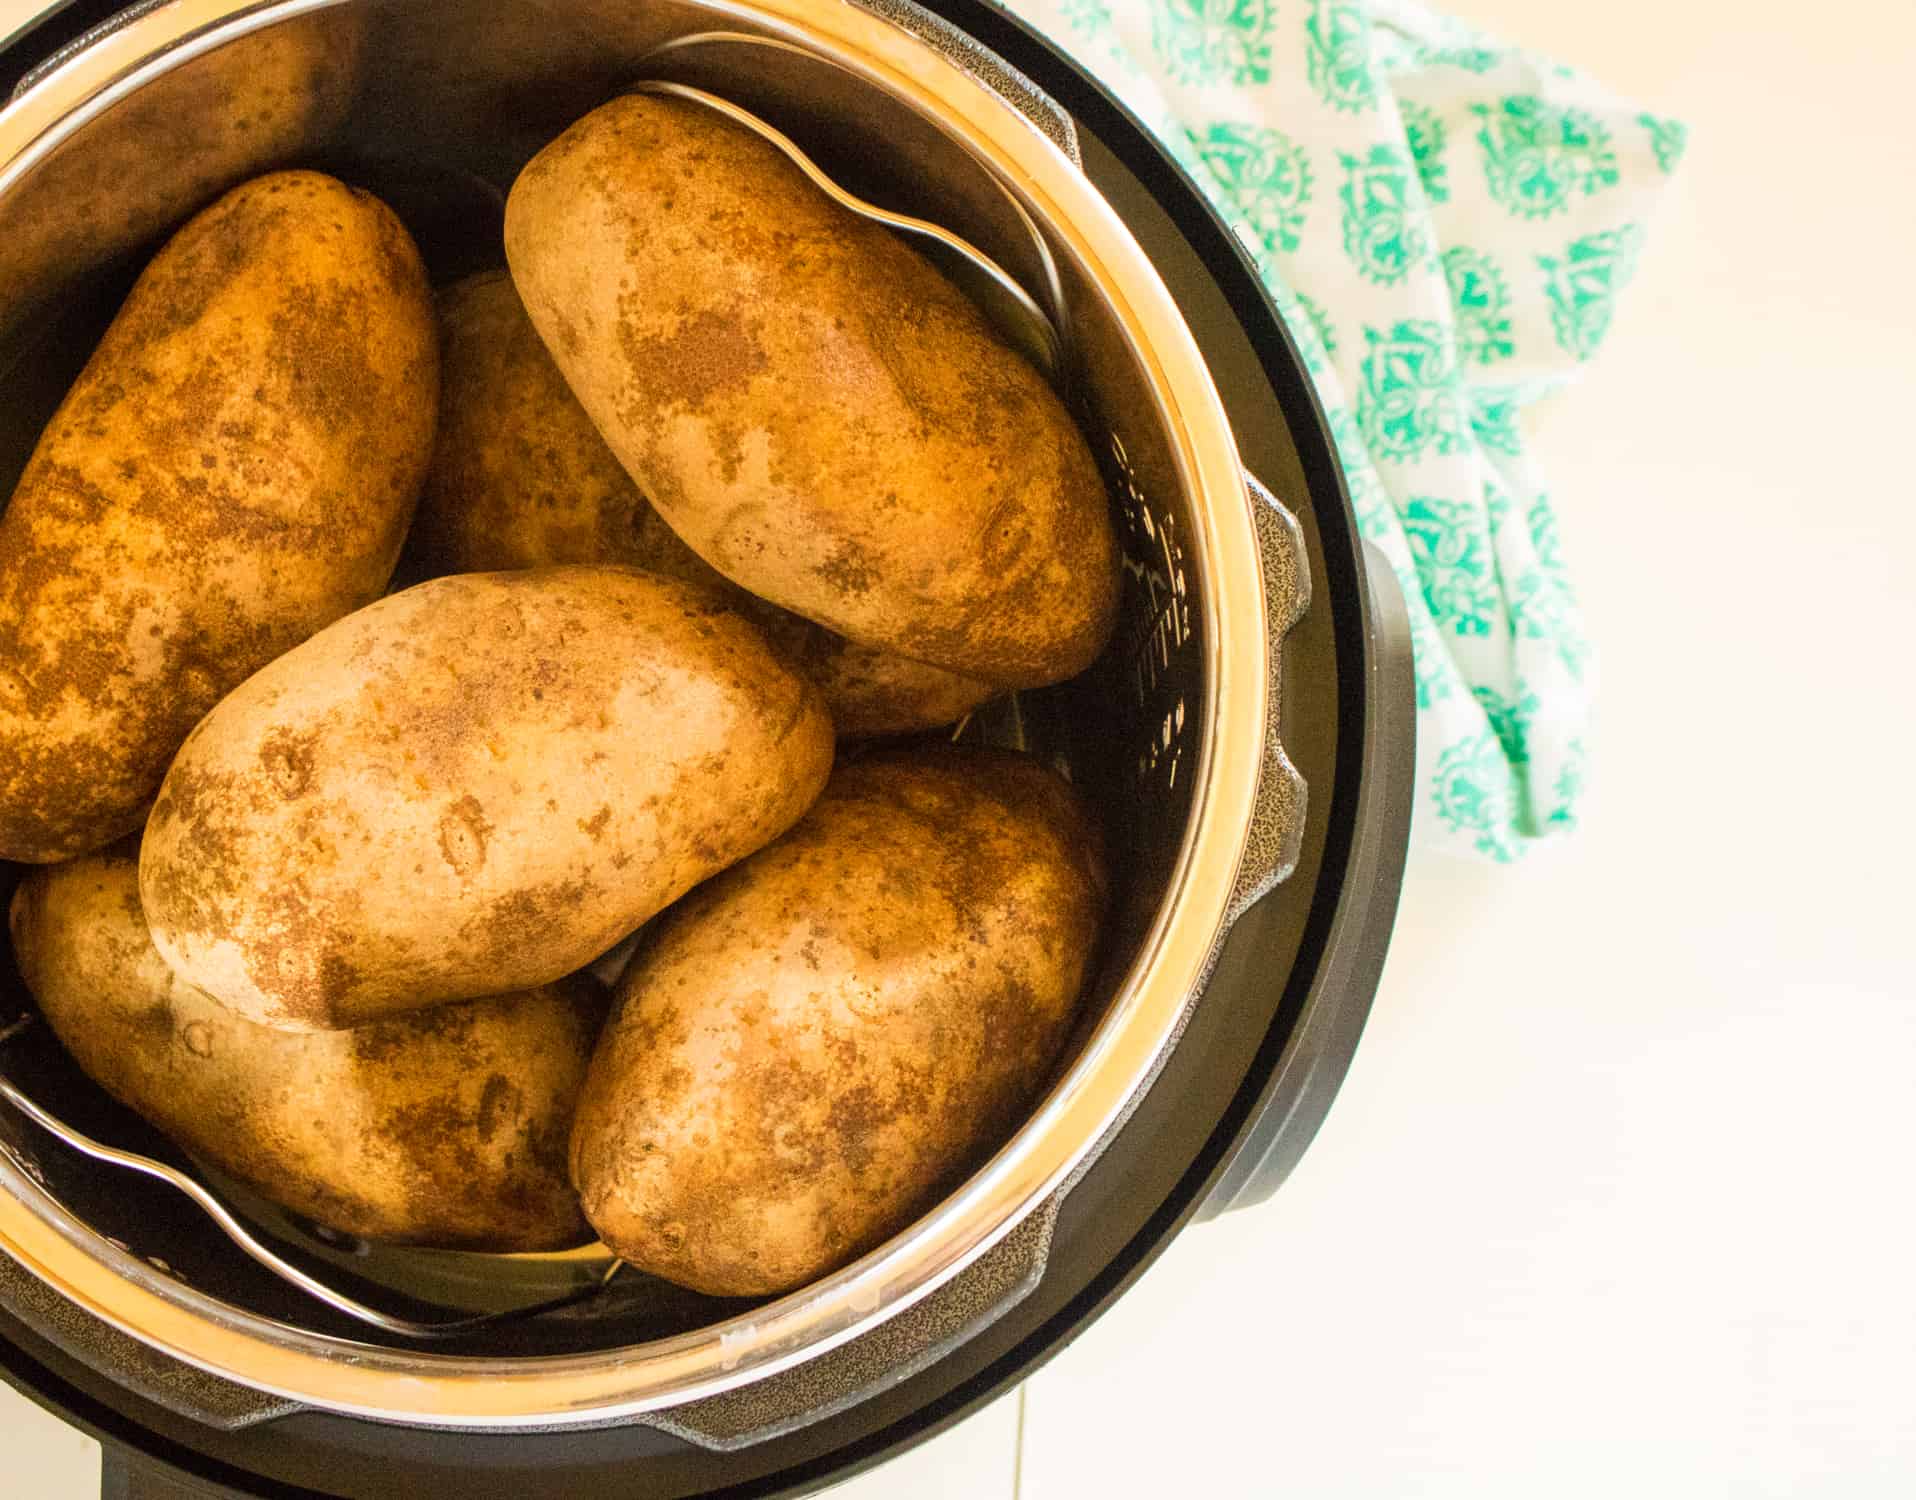 How to Make Instant Pot Baked Potatoes - An Instant Pot Side Dish